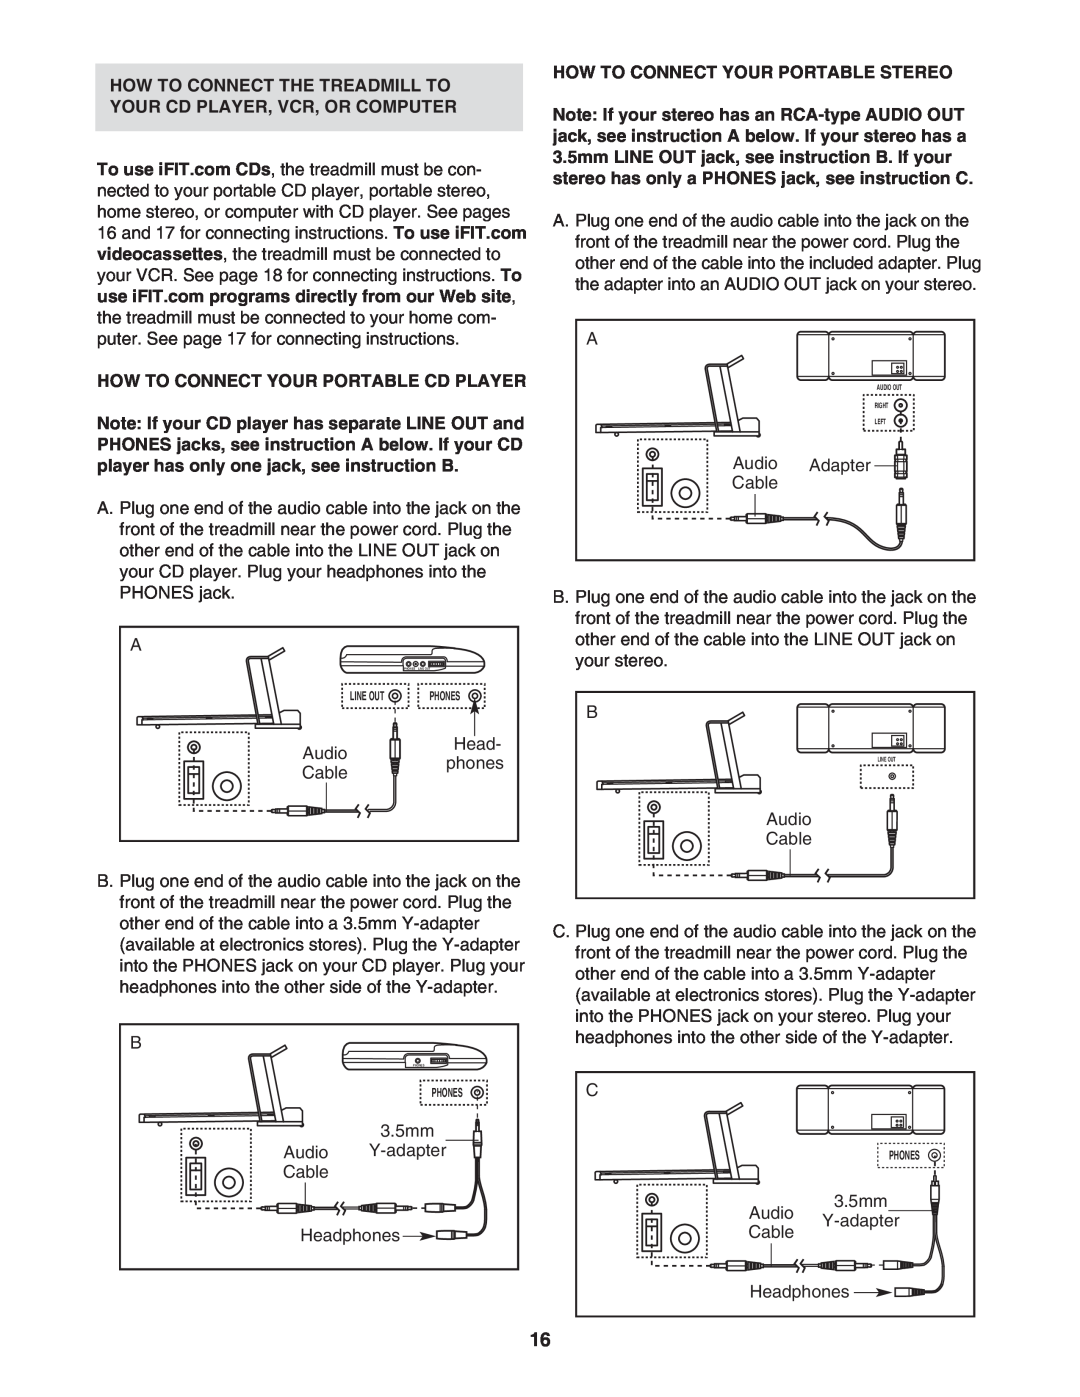 ProForm DTL73942 How To Connect The Treadmill To Your Cd Player, Vcr, Or Computer, How To Connect Your Portable Cd Player 